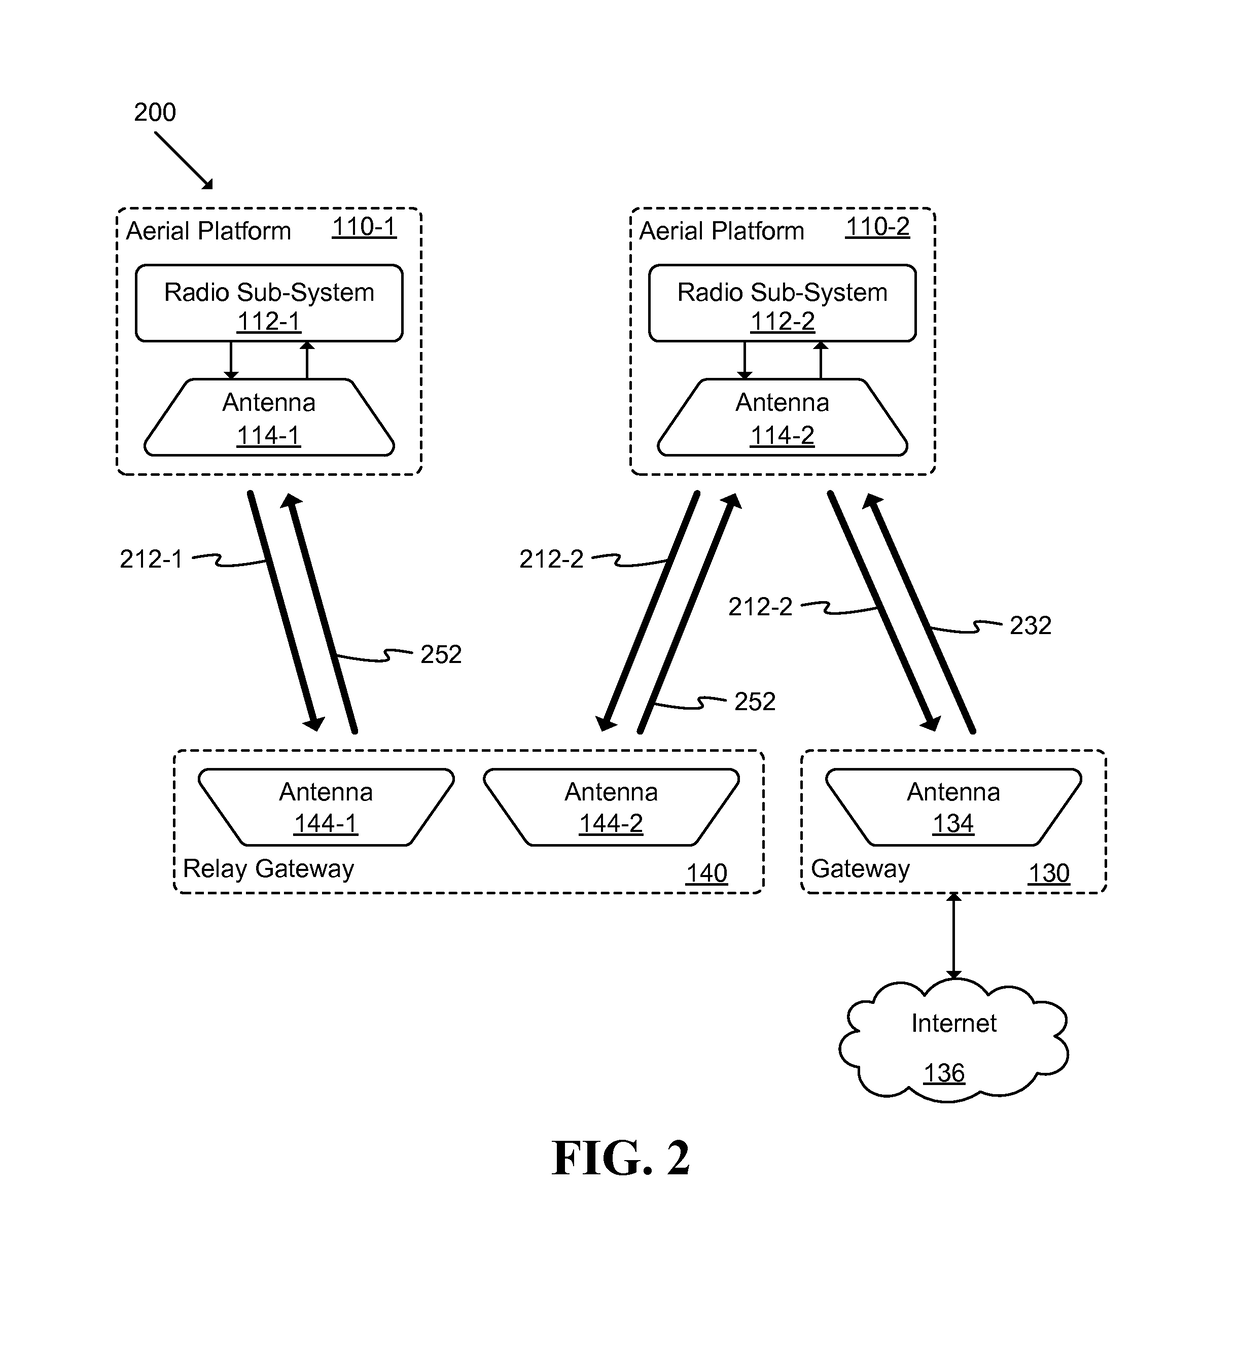 Unmanned aerial vehicle communication using distributed antenna placement and beam pointing